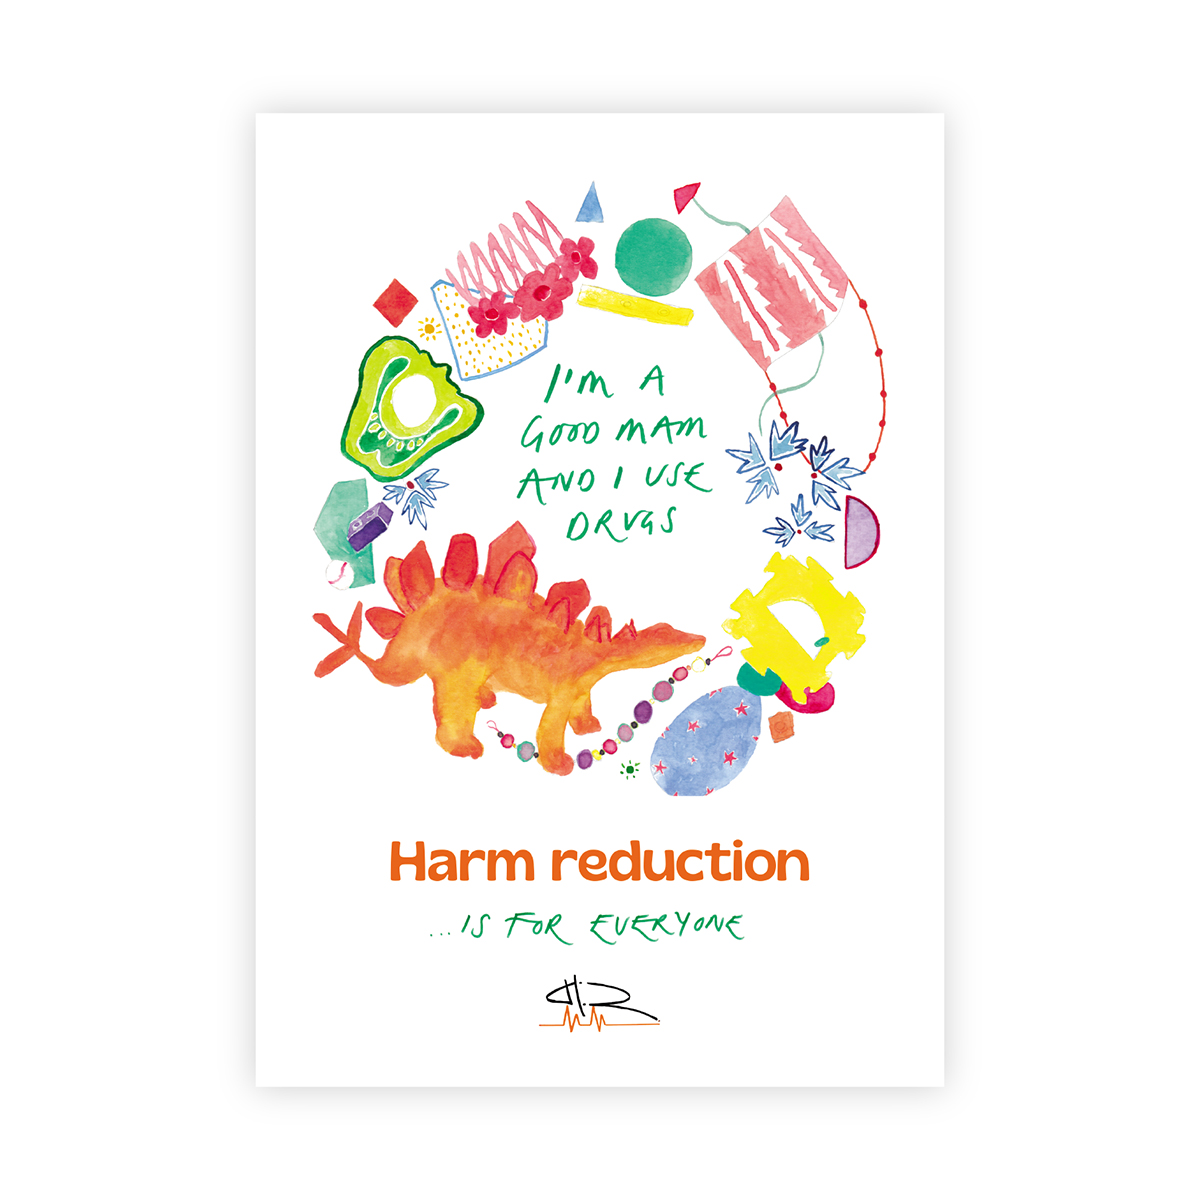 I'm a good mam... Harm reduction is for everyone  (Northern dialect edition)  pink